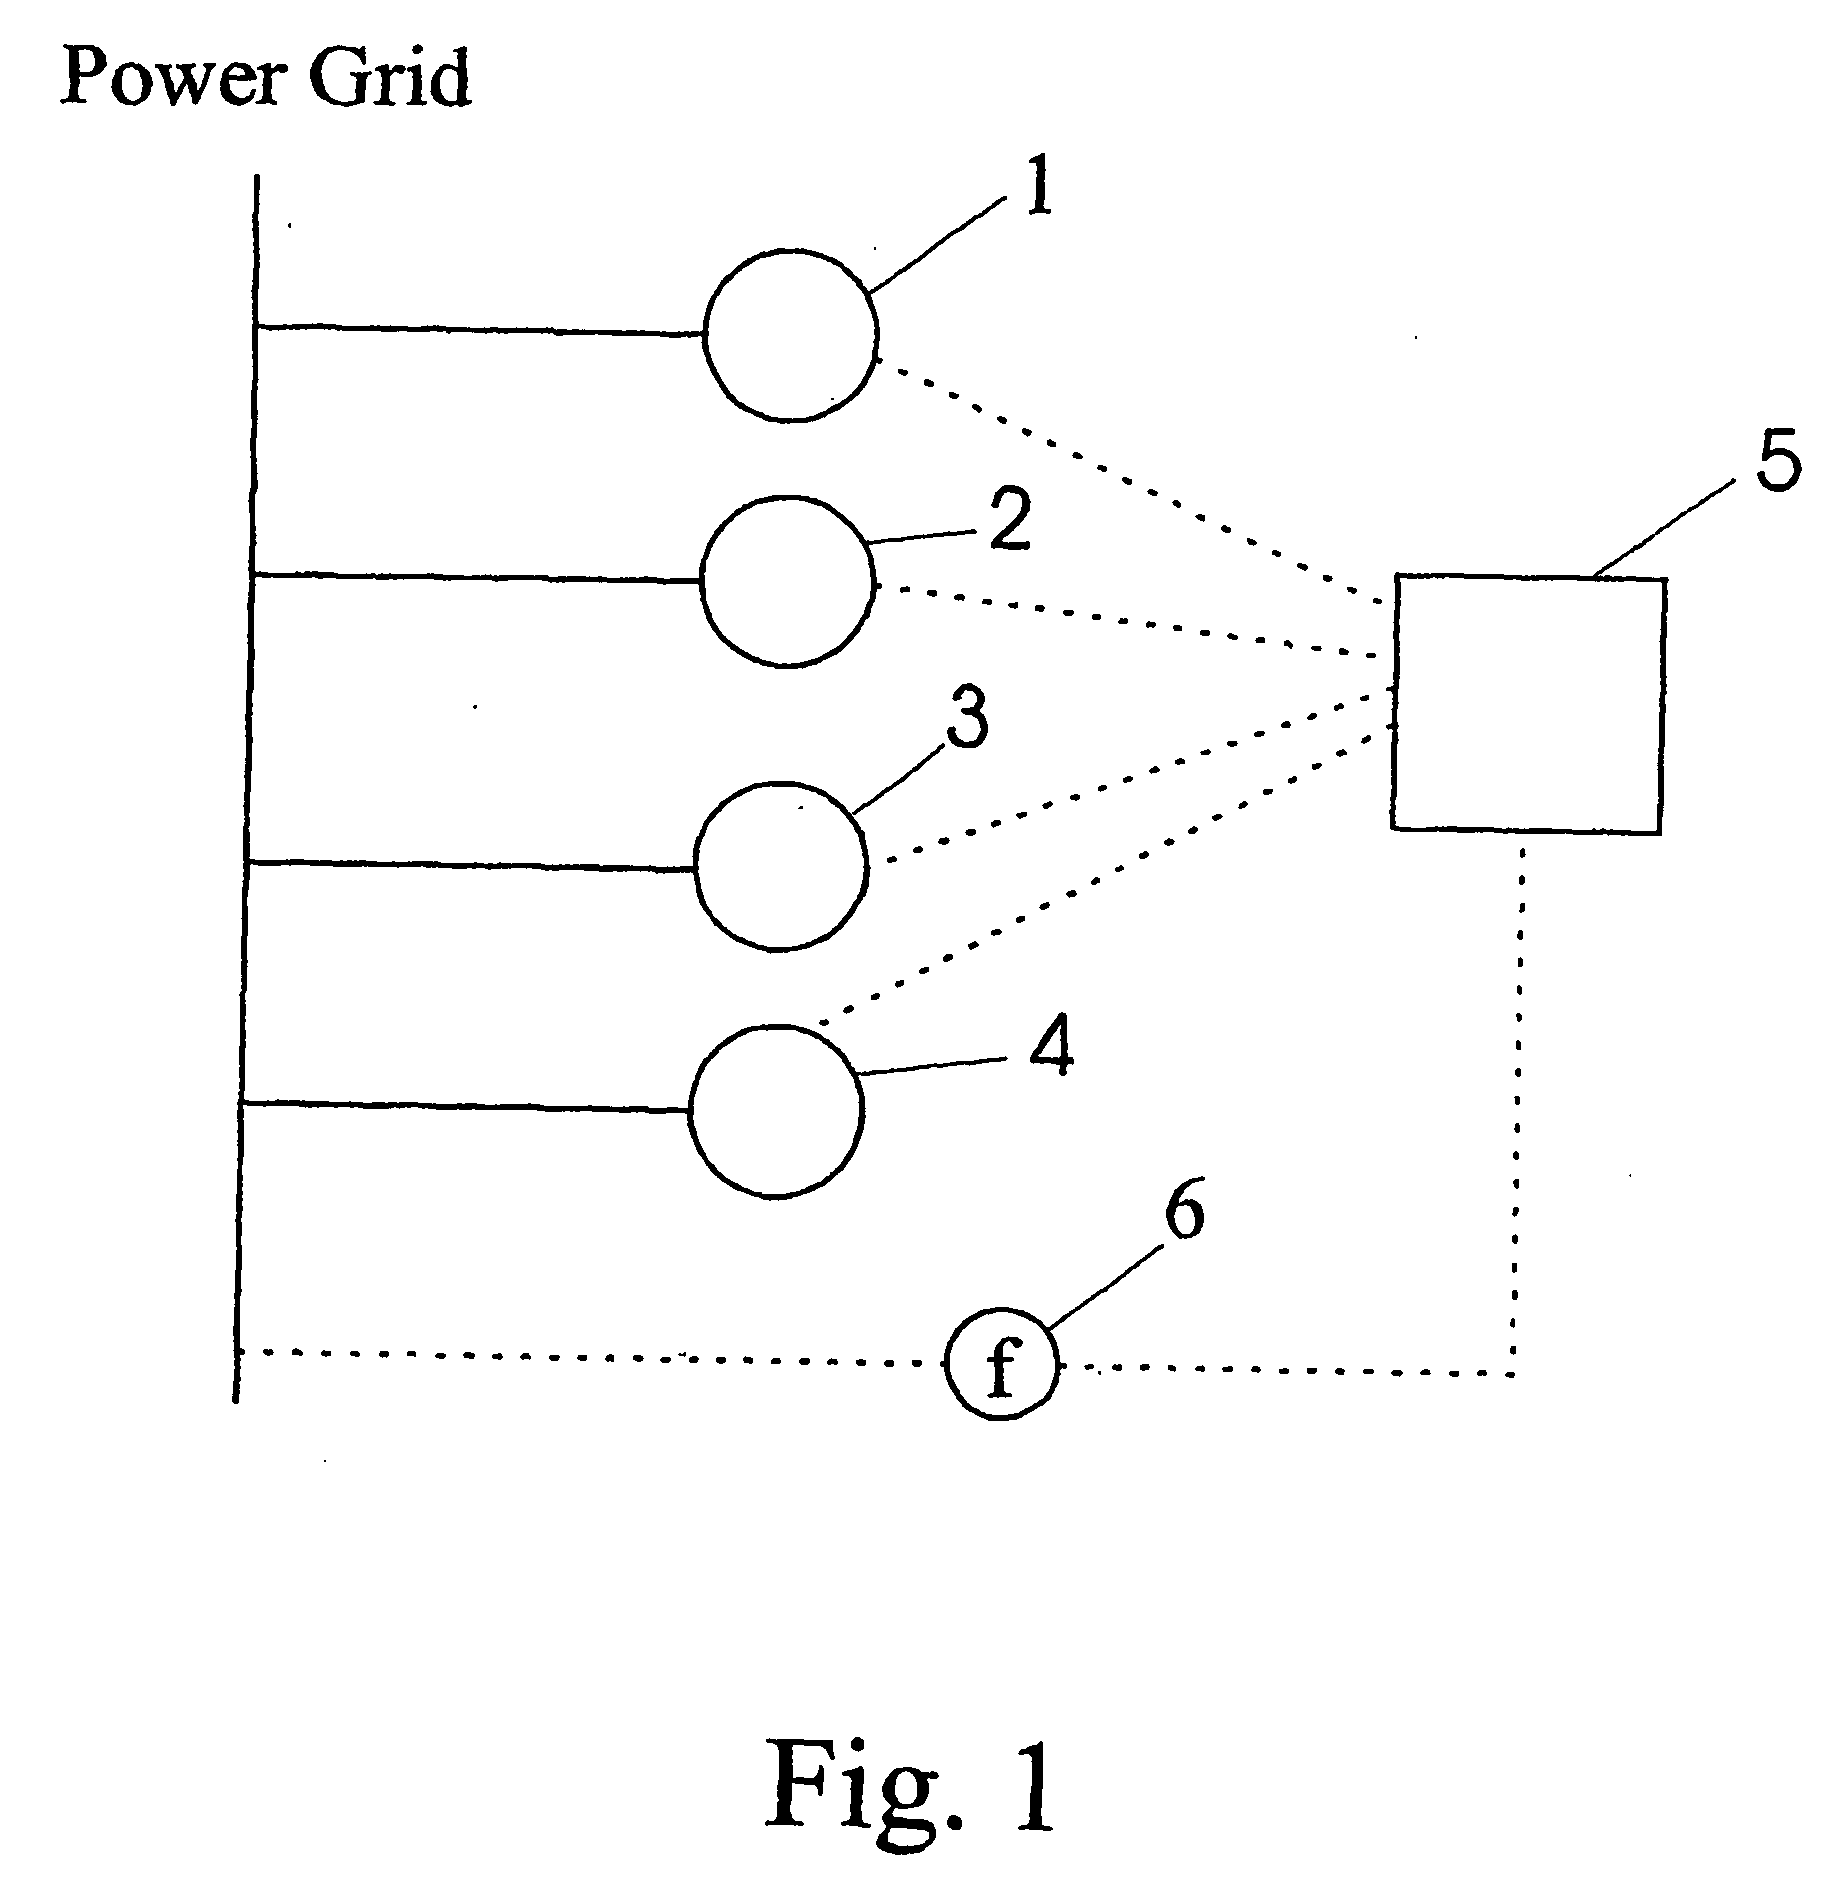 Wind farm and method for operating same